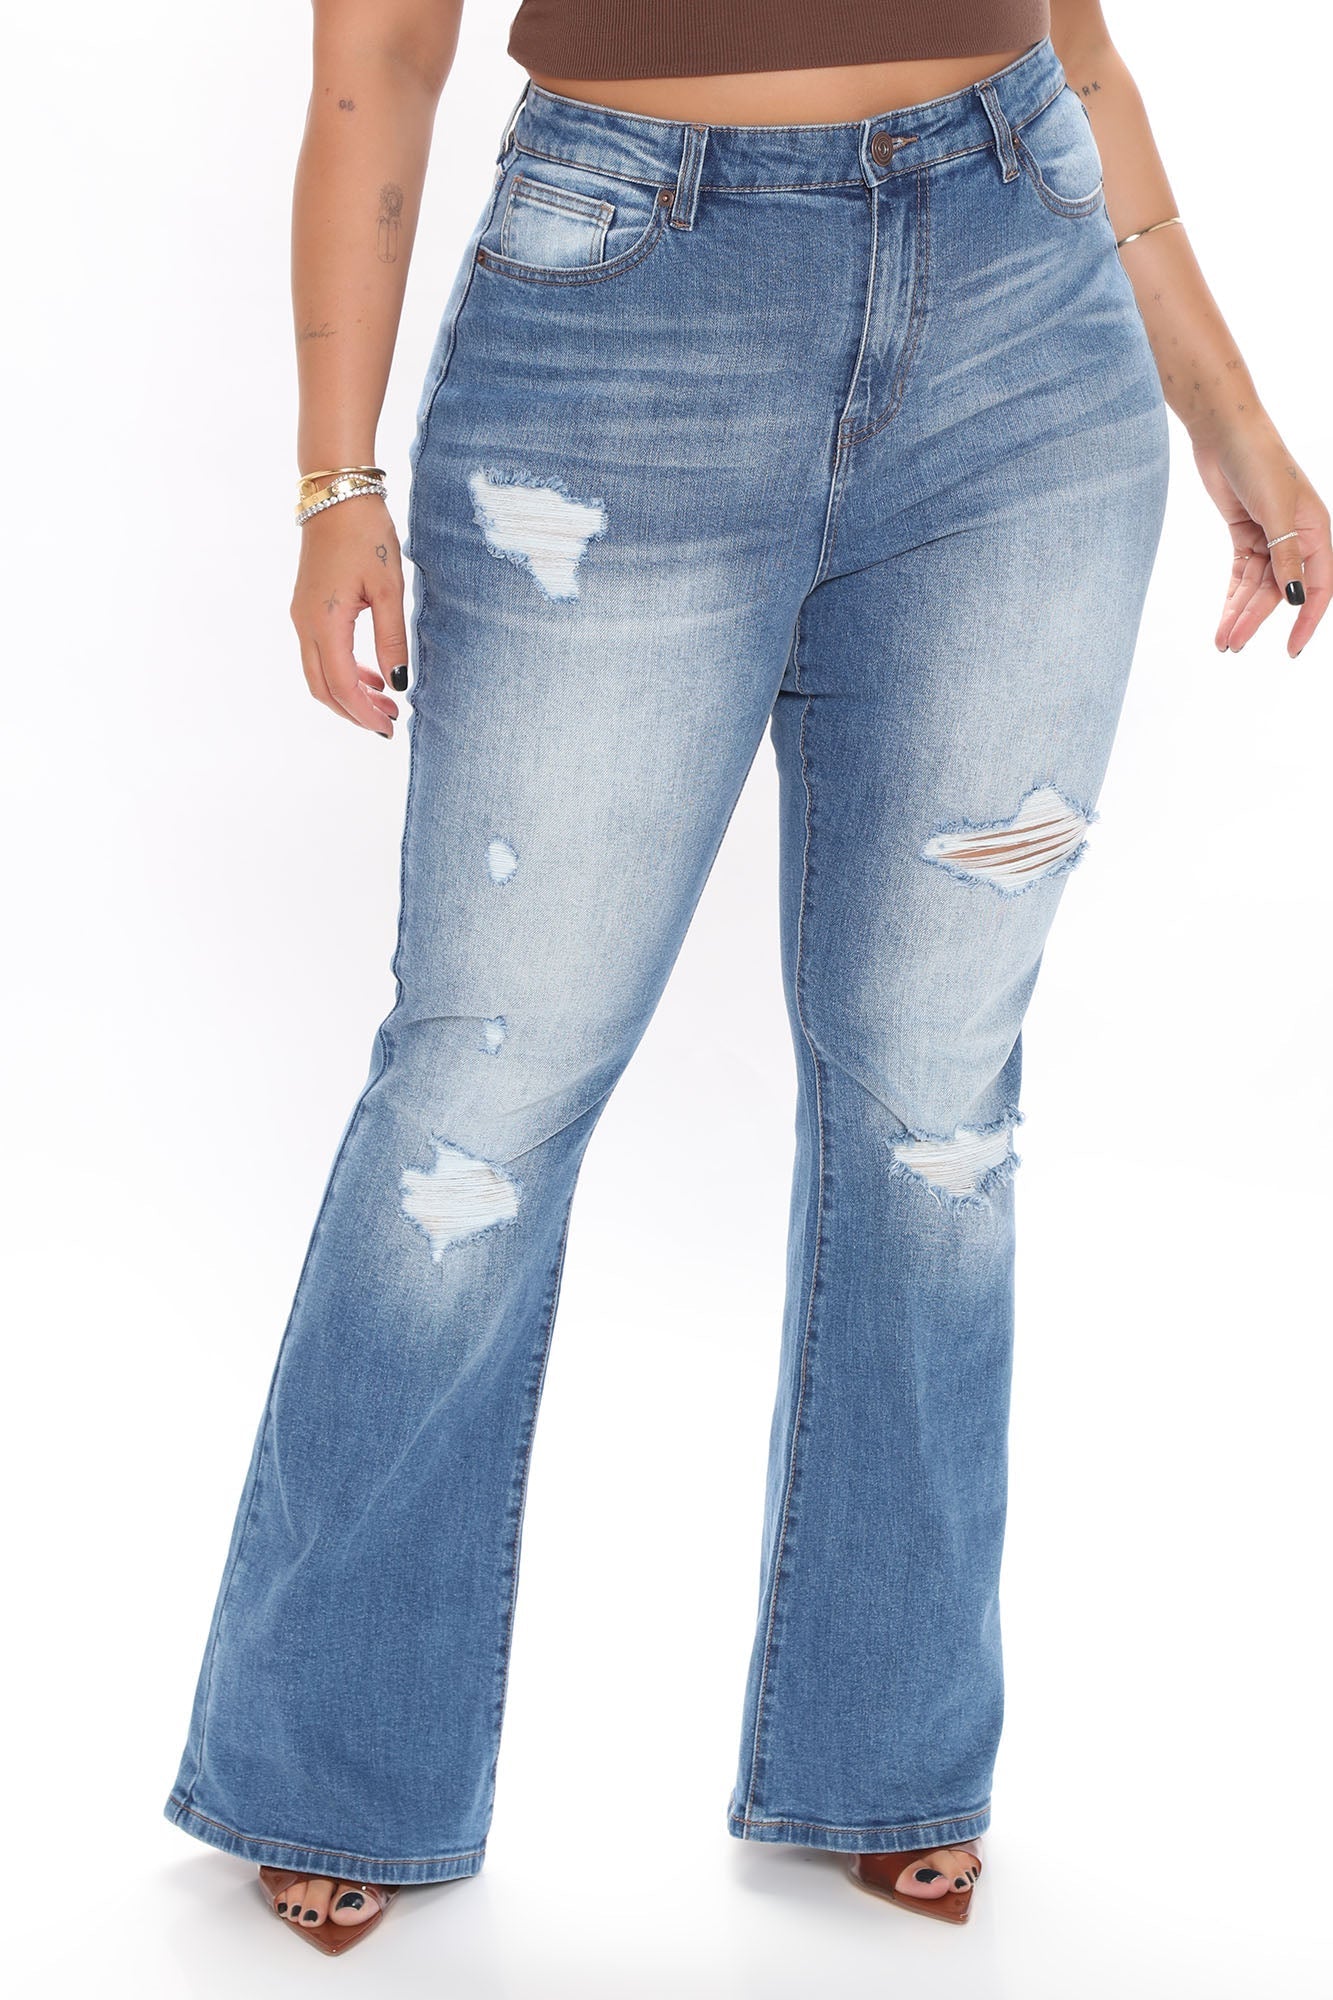 Not My First Rodeo Ripped Flare Jeans - Medium Blue Wash